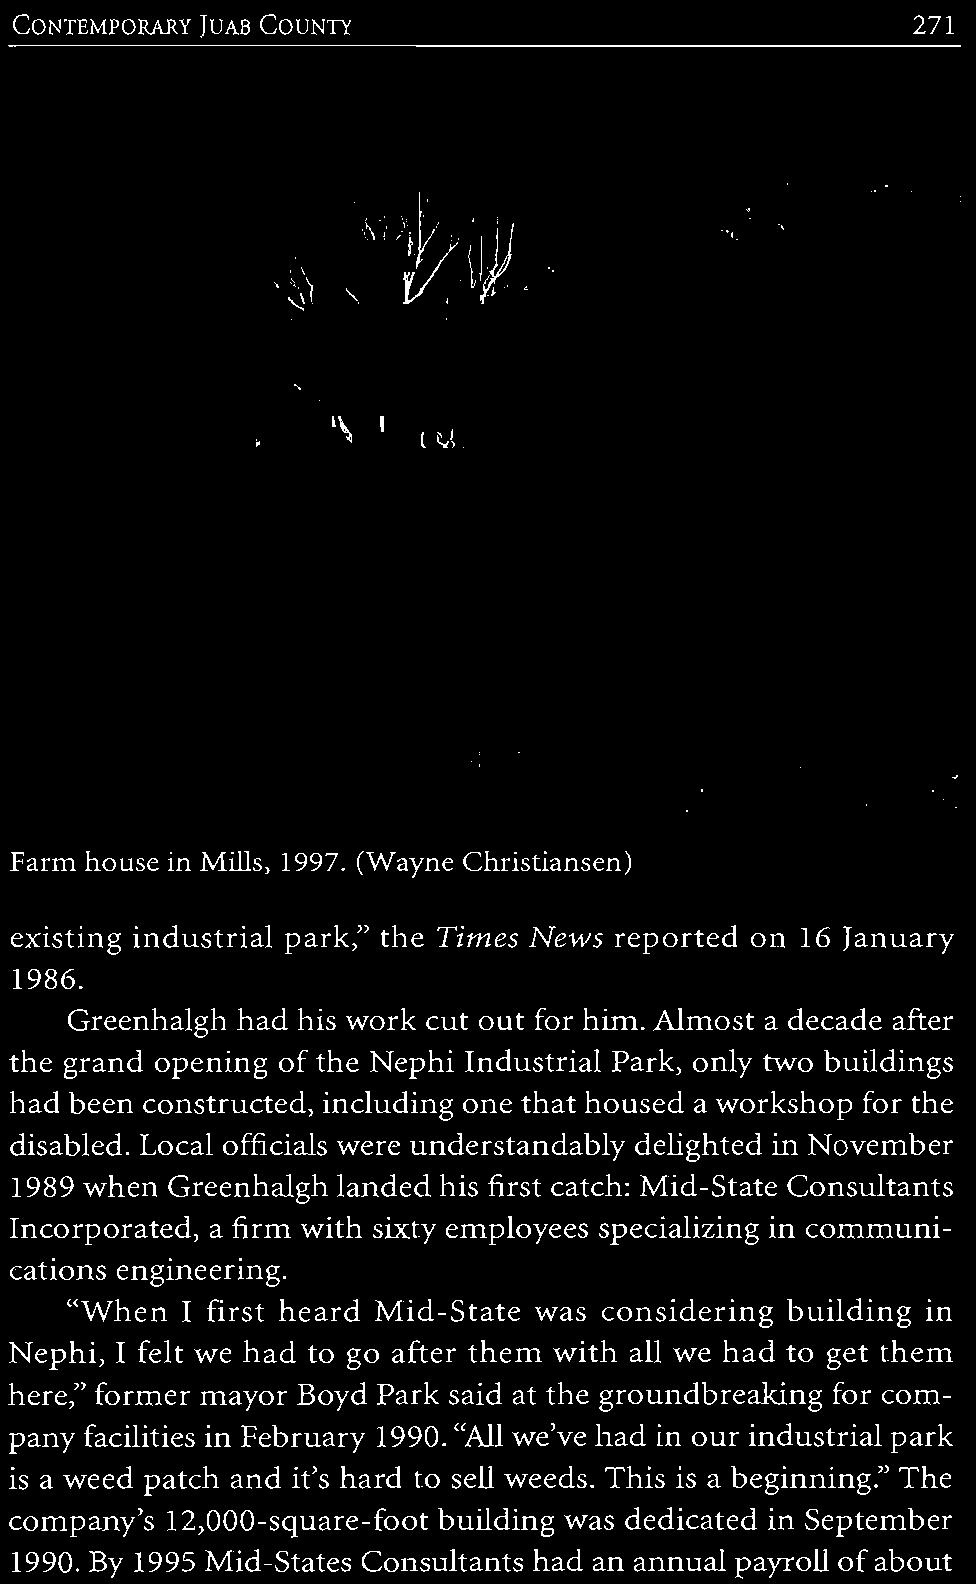 Local officials were understandably delighted in November 1989 when Greenhalgh landed his first catch: Mid-State Consultants Incorporated, a firm with sixty employees specializing in communications